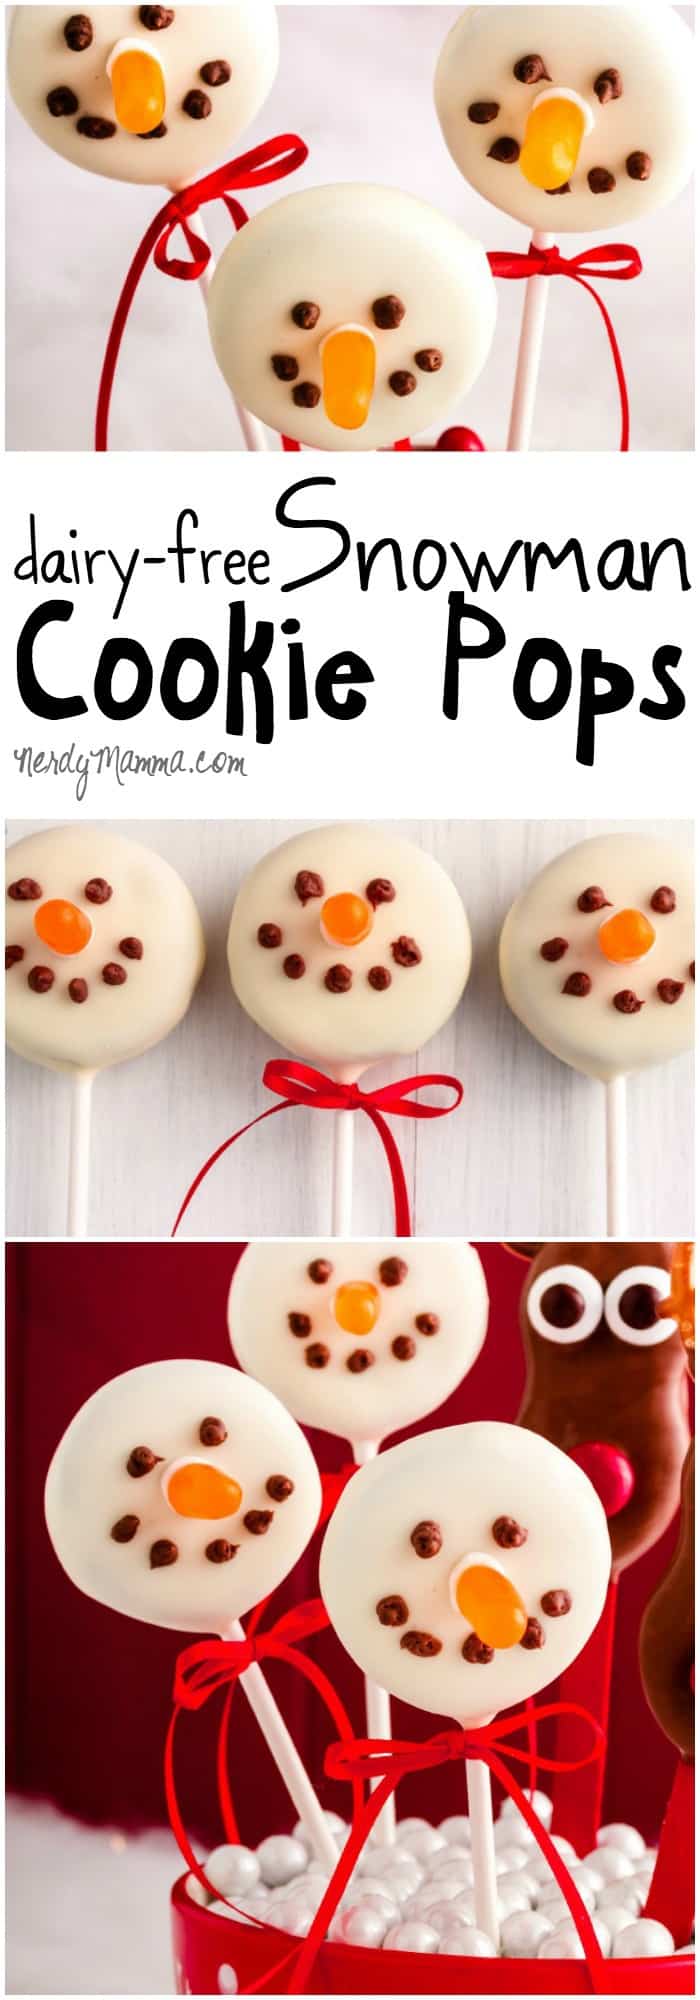 I love how easy these dairy-free snowman cookie pops were to put together! Definitely making them for my kid's Christmas school party.